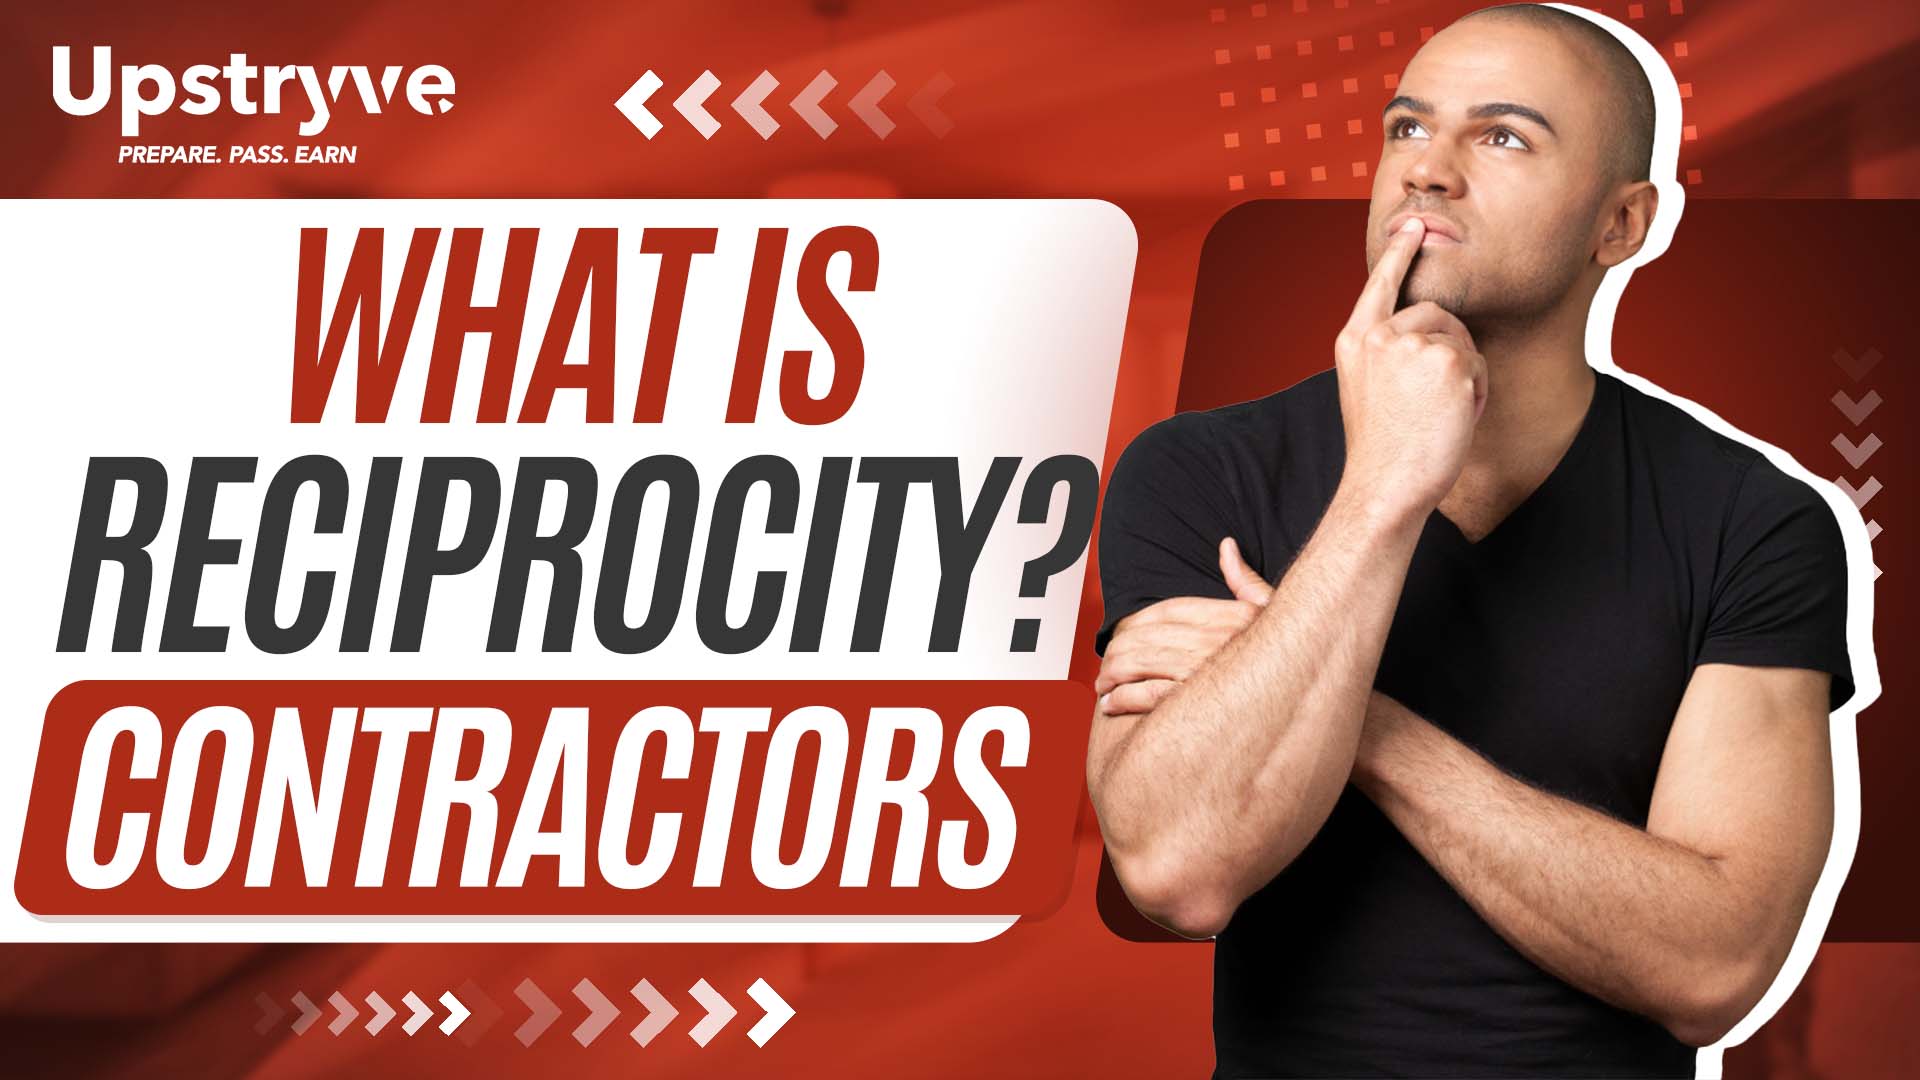 What States Offer Reciprocity For General Contractors? This is a question we constantly get here at Upstryve. Luckily Licensing Expert J.D. Myers has all the details on the topic. So what exactly is reciprocity and why is it important to know? It is essentially saying that a state accepts your license you received from a different state. They acknowledge that the qualifications/exams/scope of work is similar enough that the new state will not require you to go through the entire examination process all over again i.e. You want to pull permits in NC but you only have an SC license. NC accepts the SC license through their reciprocity agreement.

Below we will leave the definition based on Florida, however, most states that participate will have the same or a similar definition. For more details make sure to watch the entire video and contact J.D. with any questions you may have.

DEFINITIONS: Section 489.115 (3)(c), Florida Statutes, provides for certification by reciprocity for any applicant who holds a valid, current, license to practice contracting issued by another state, if the state has entered into a reciprocal agreement with the Board, and subject to the terms of that agreement.